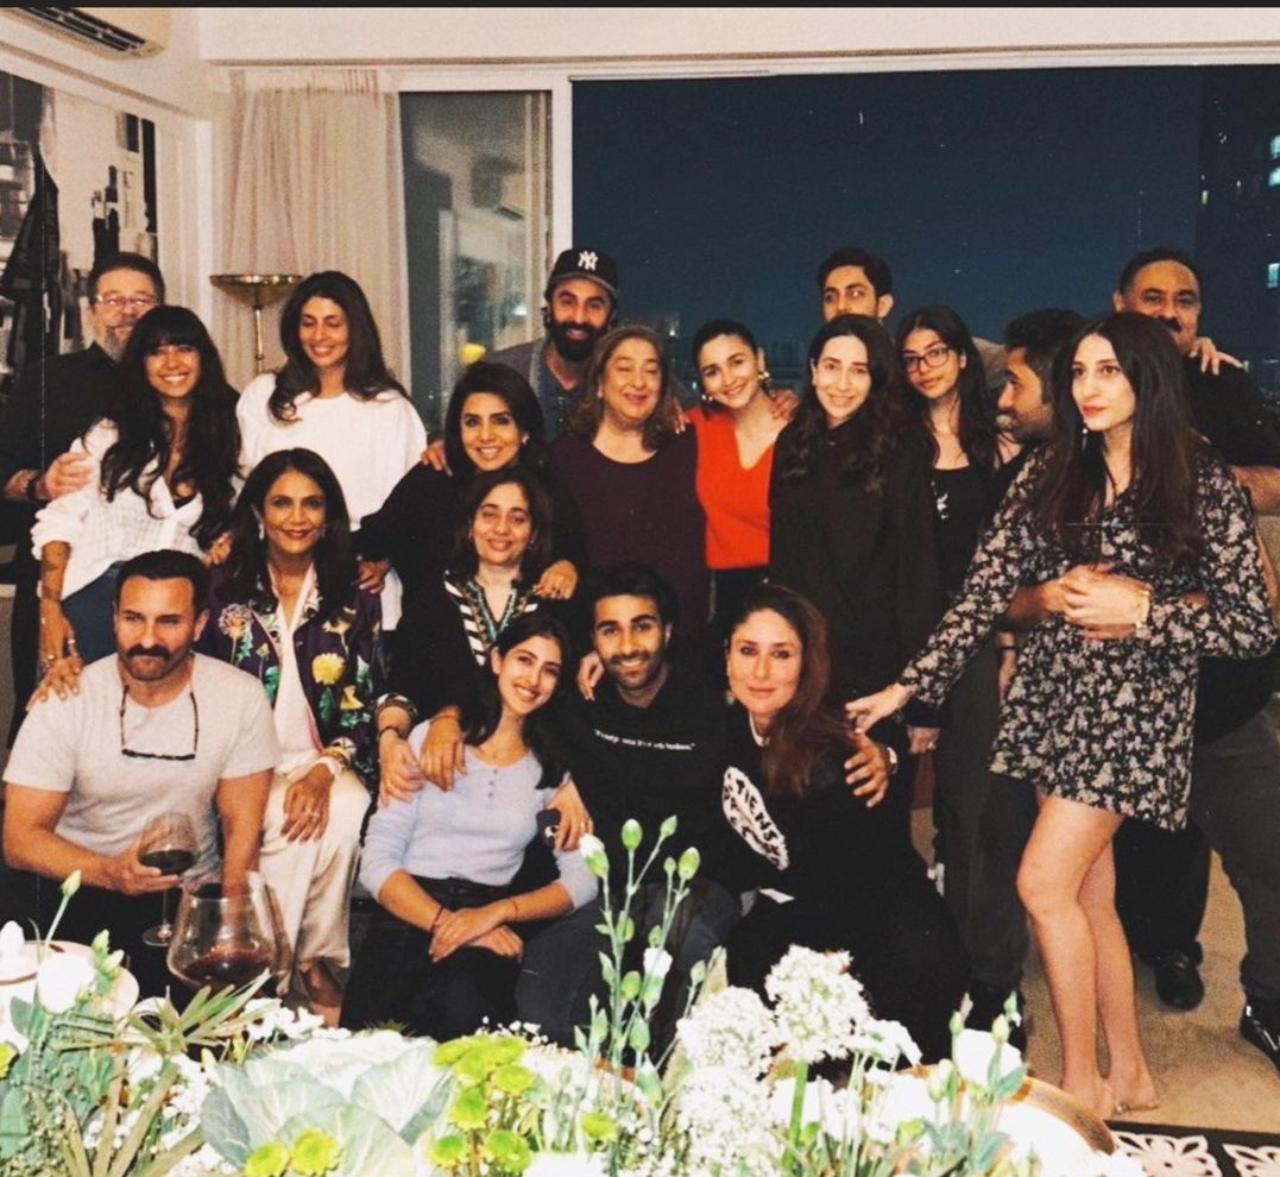 Mid-week blues are real and what better way to get rid of them than celebrating with your near and dear ones. On Tuesday night, the Kapoor family gathered together for a night of food and good conversation